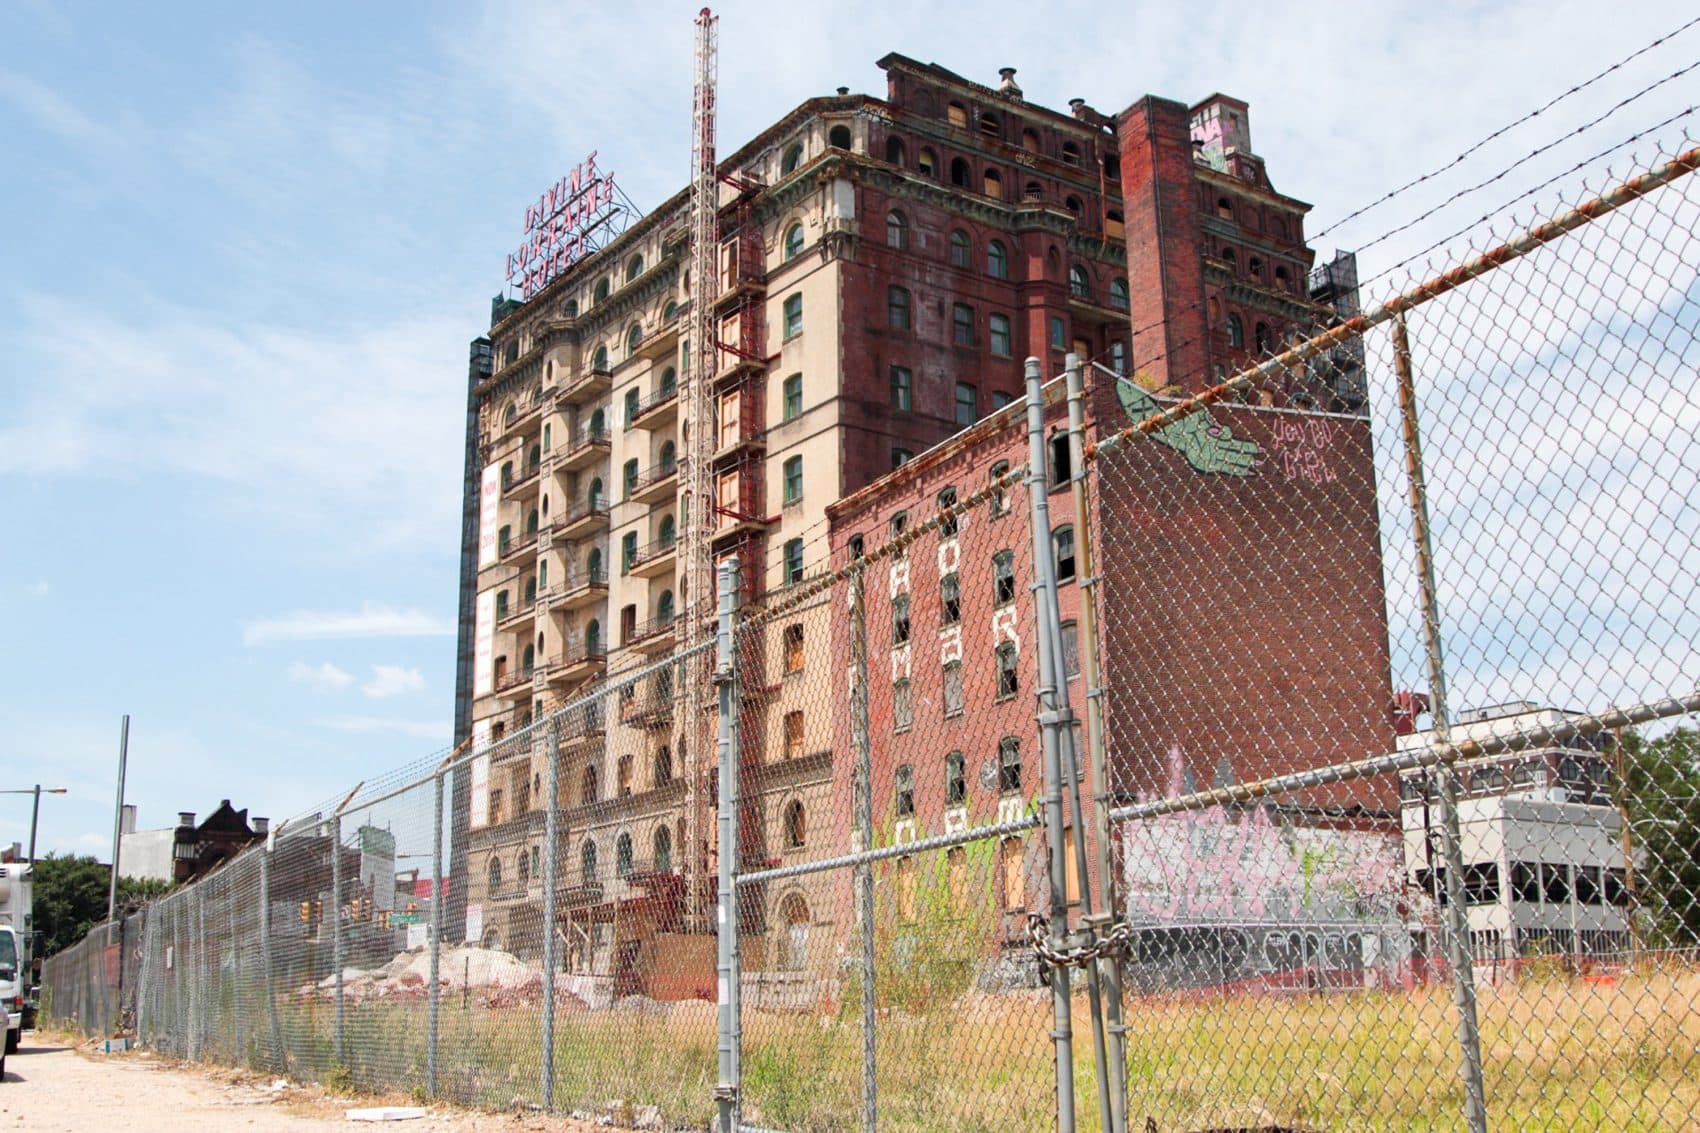 The Divine Lorraine Hotel, a late Victorian high-rise located on Broad Street and Fairmount Avenue in North Philadelphia. (Dean Russell/Here & Now)